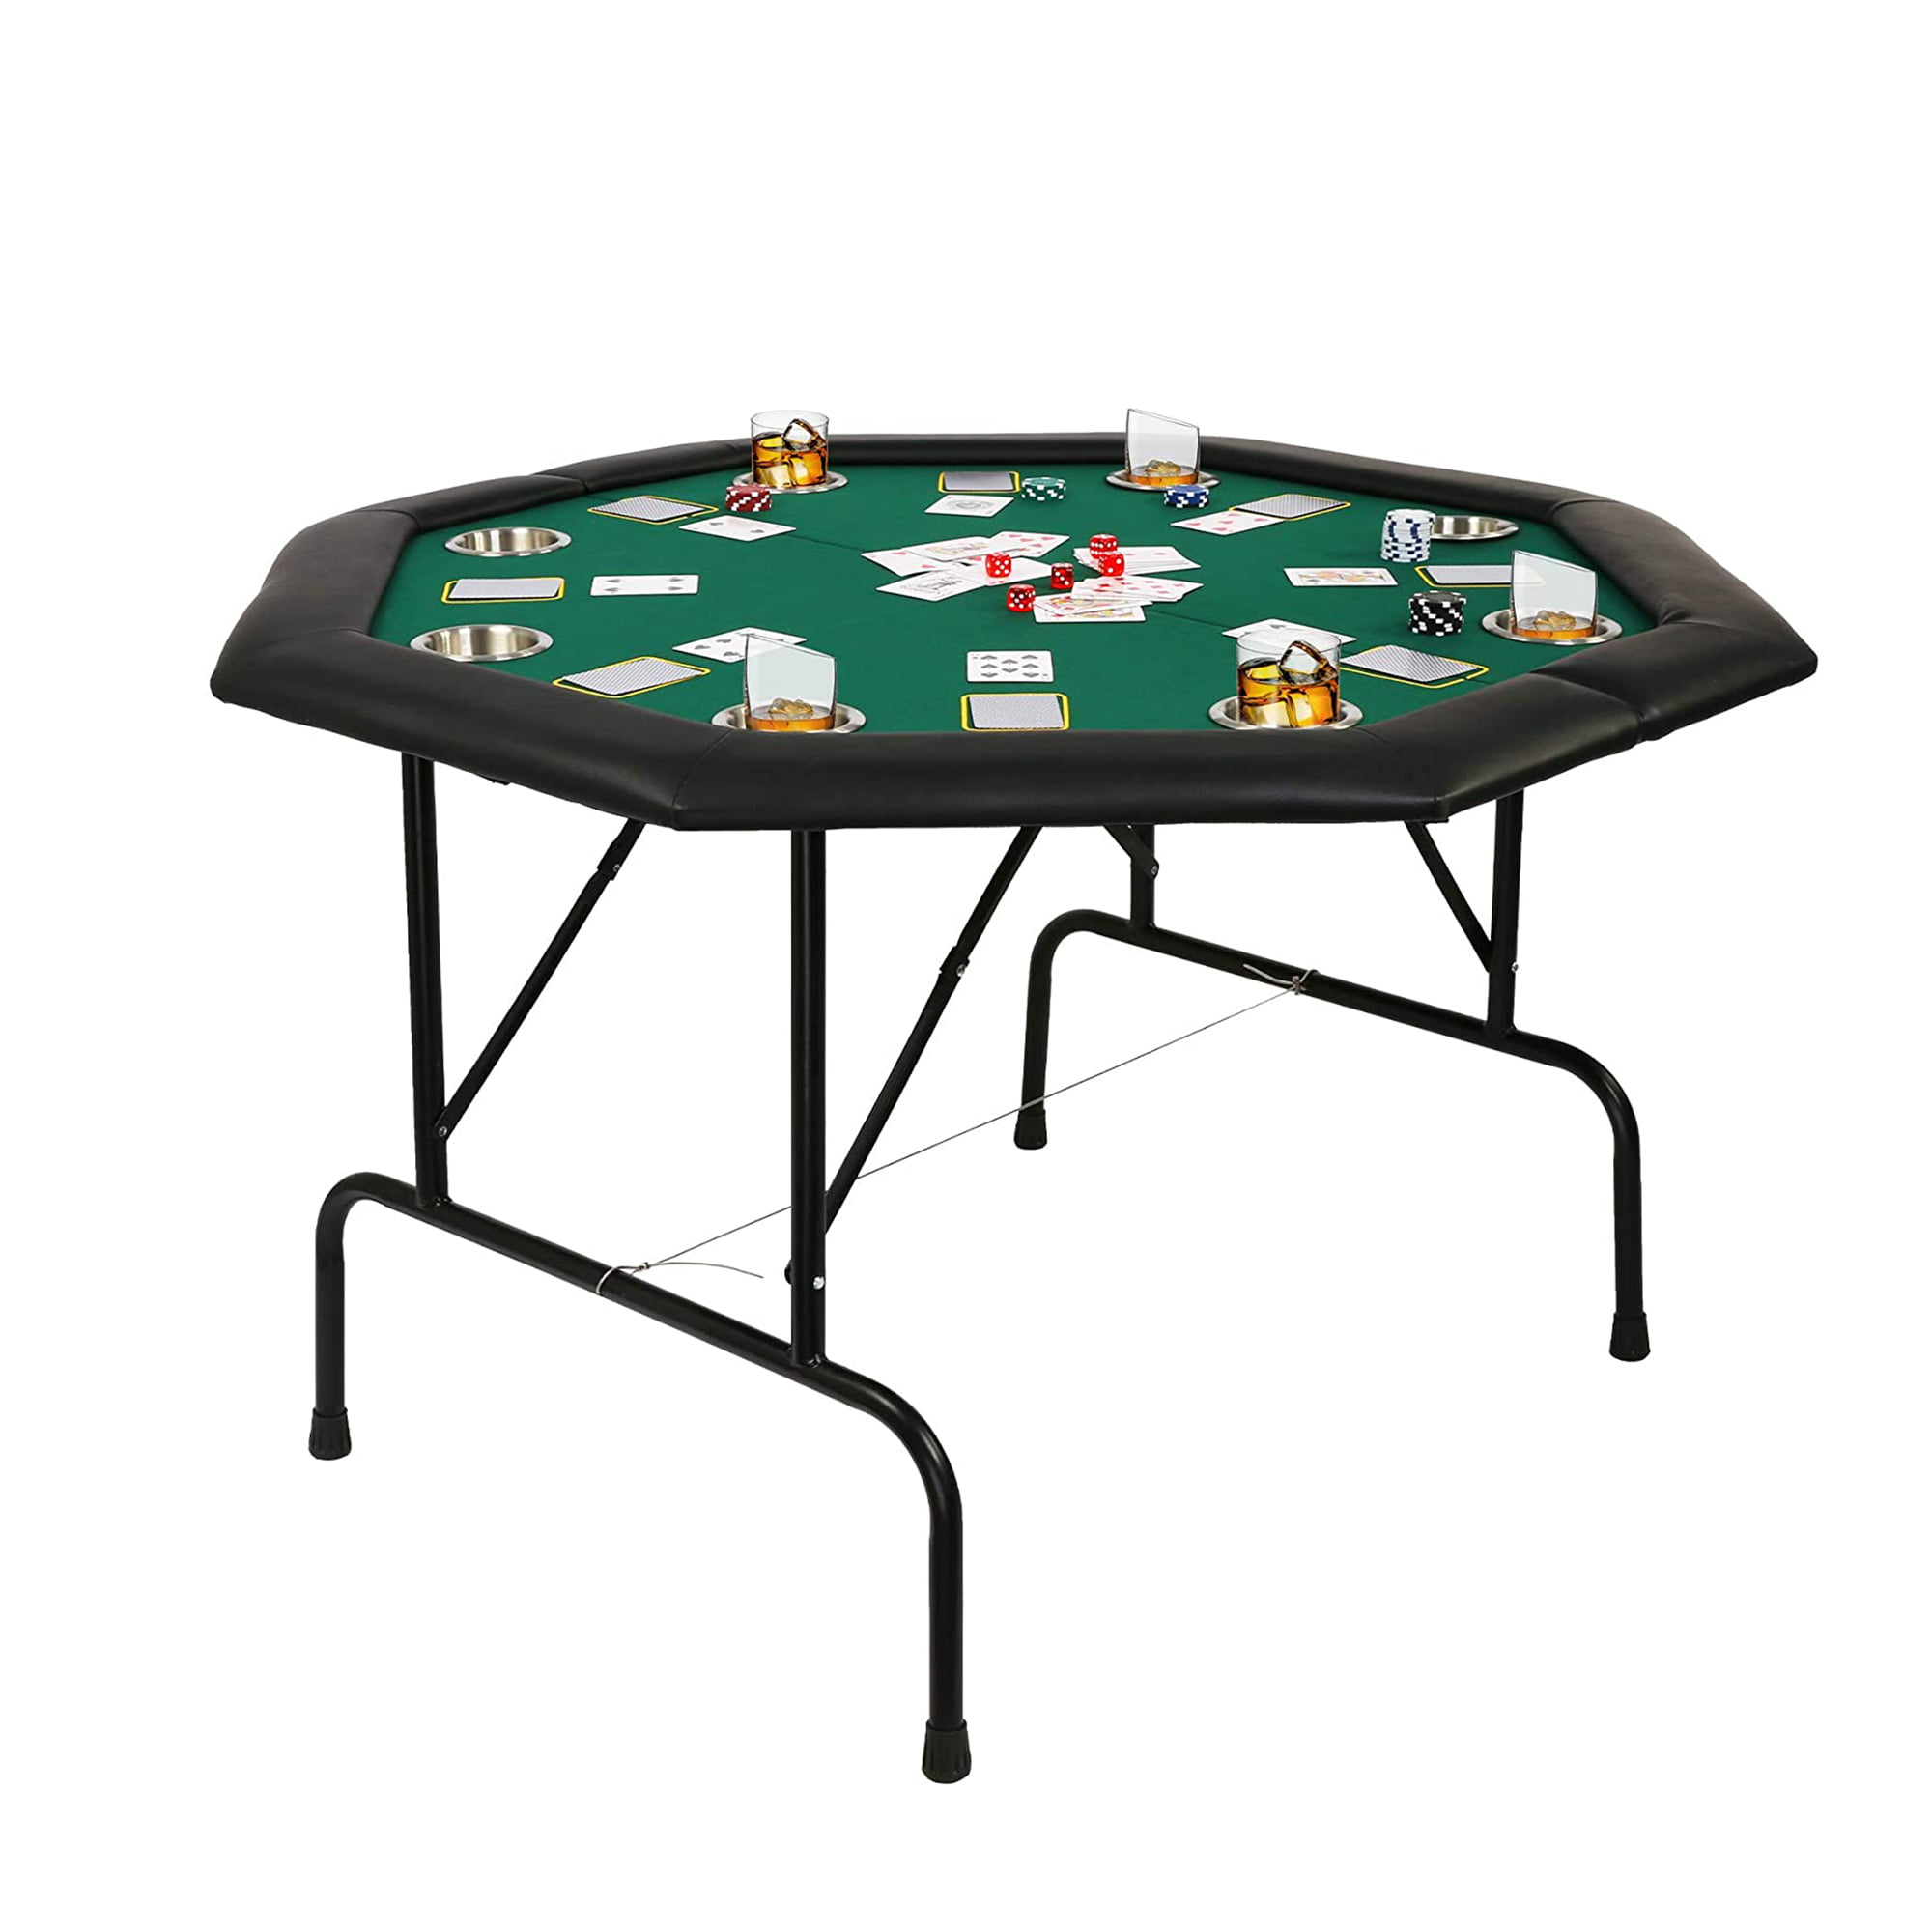 10 Player Poker Table Folding w/Cup Holders Blackjack Texas Holdem Casino Game 